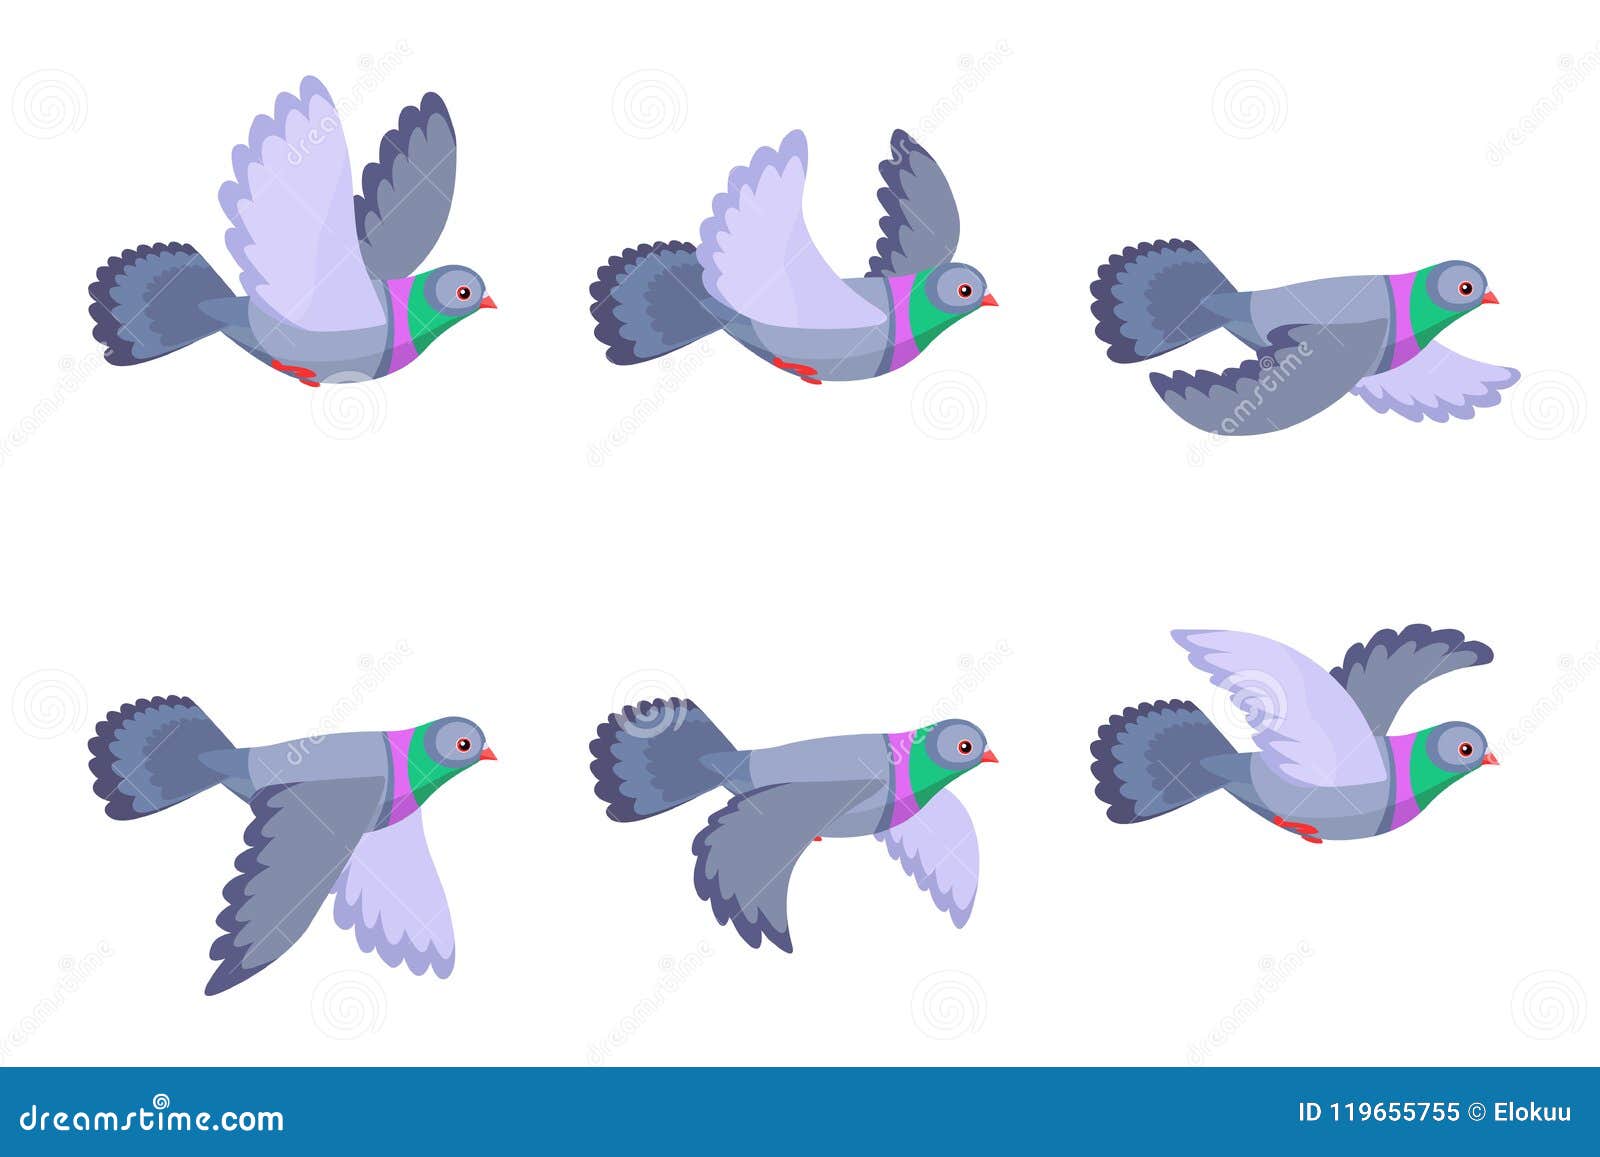 Download Cartoon Flying Pigeon Animation Sprite Isolated Stock ...